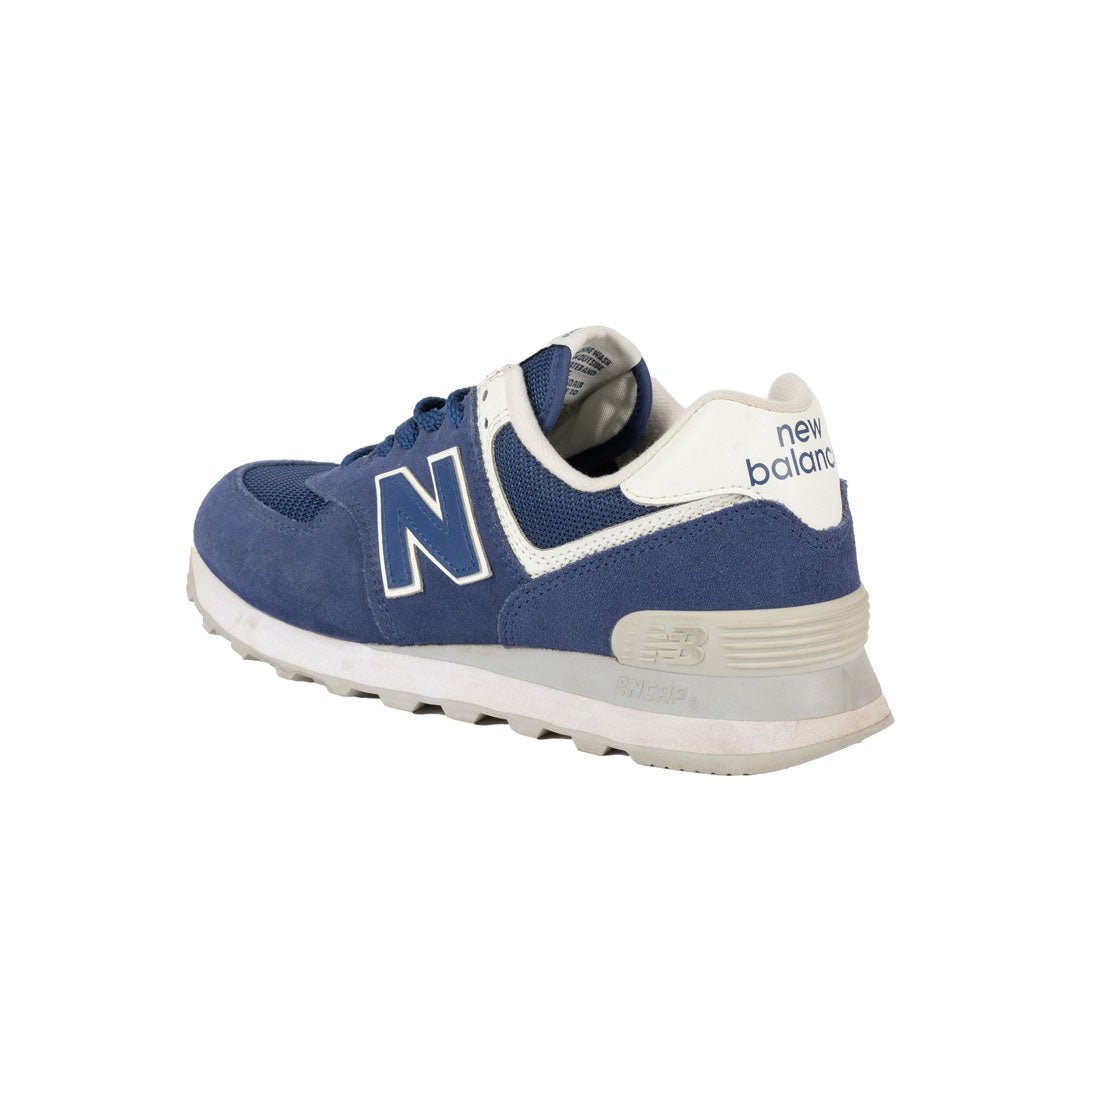 New Balance Shoes - mymadstore.com